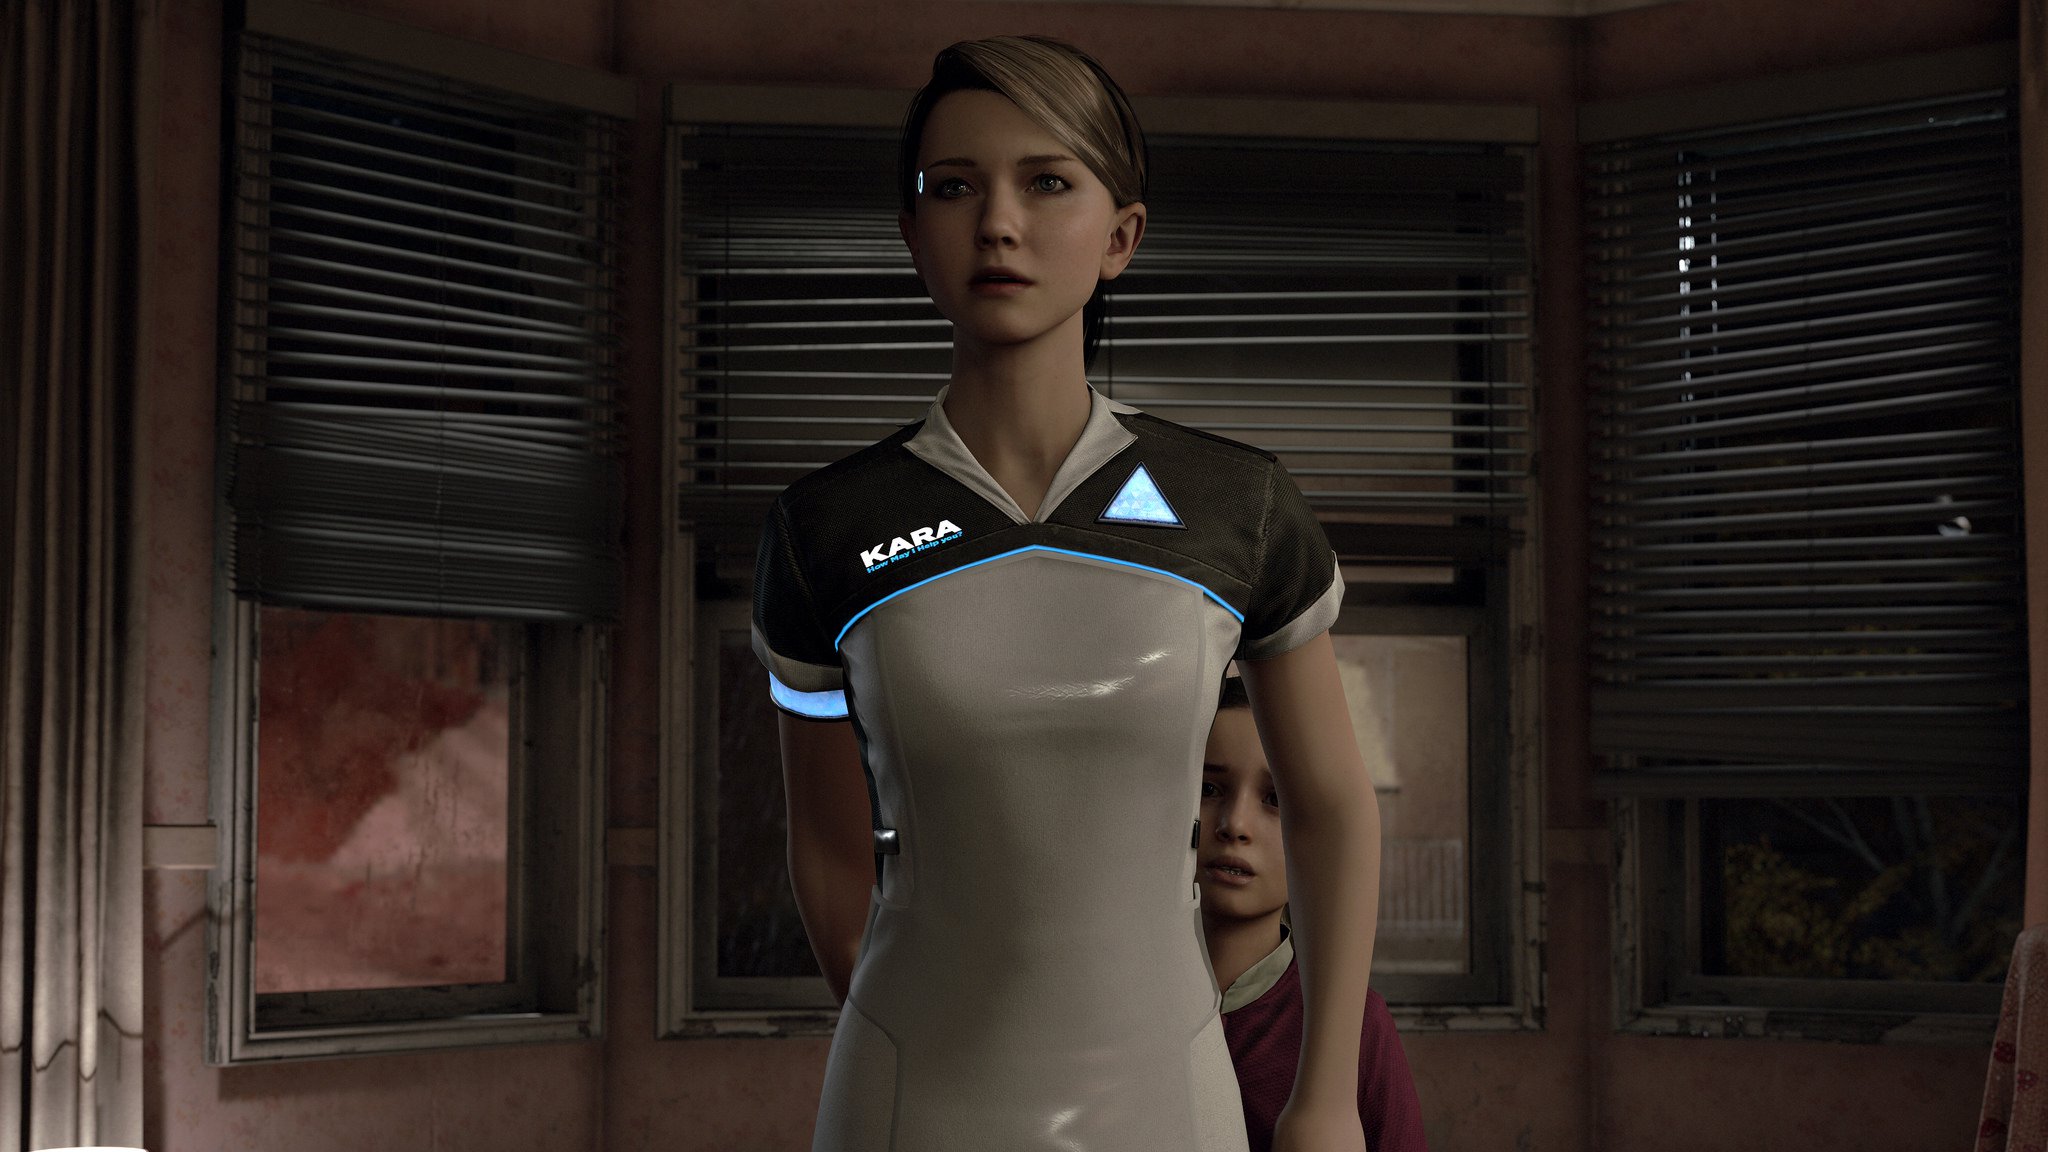 Detroit: Become Human review – an absorbing tale of android revolt